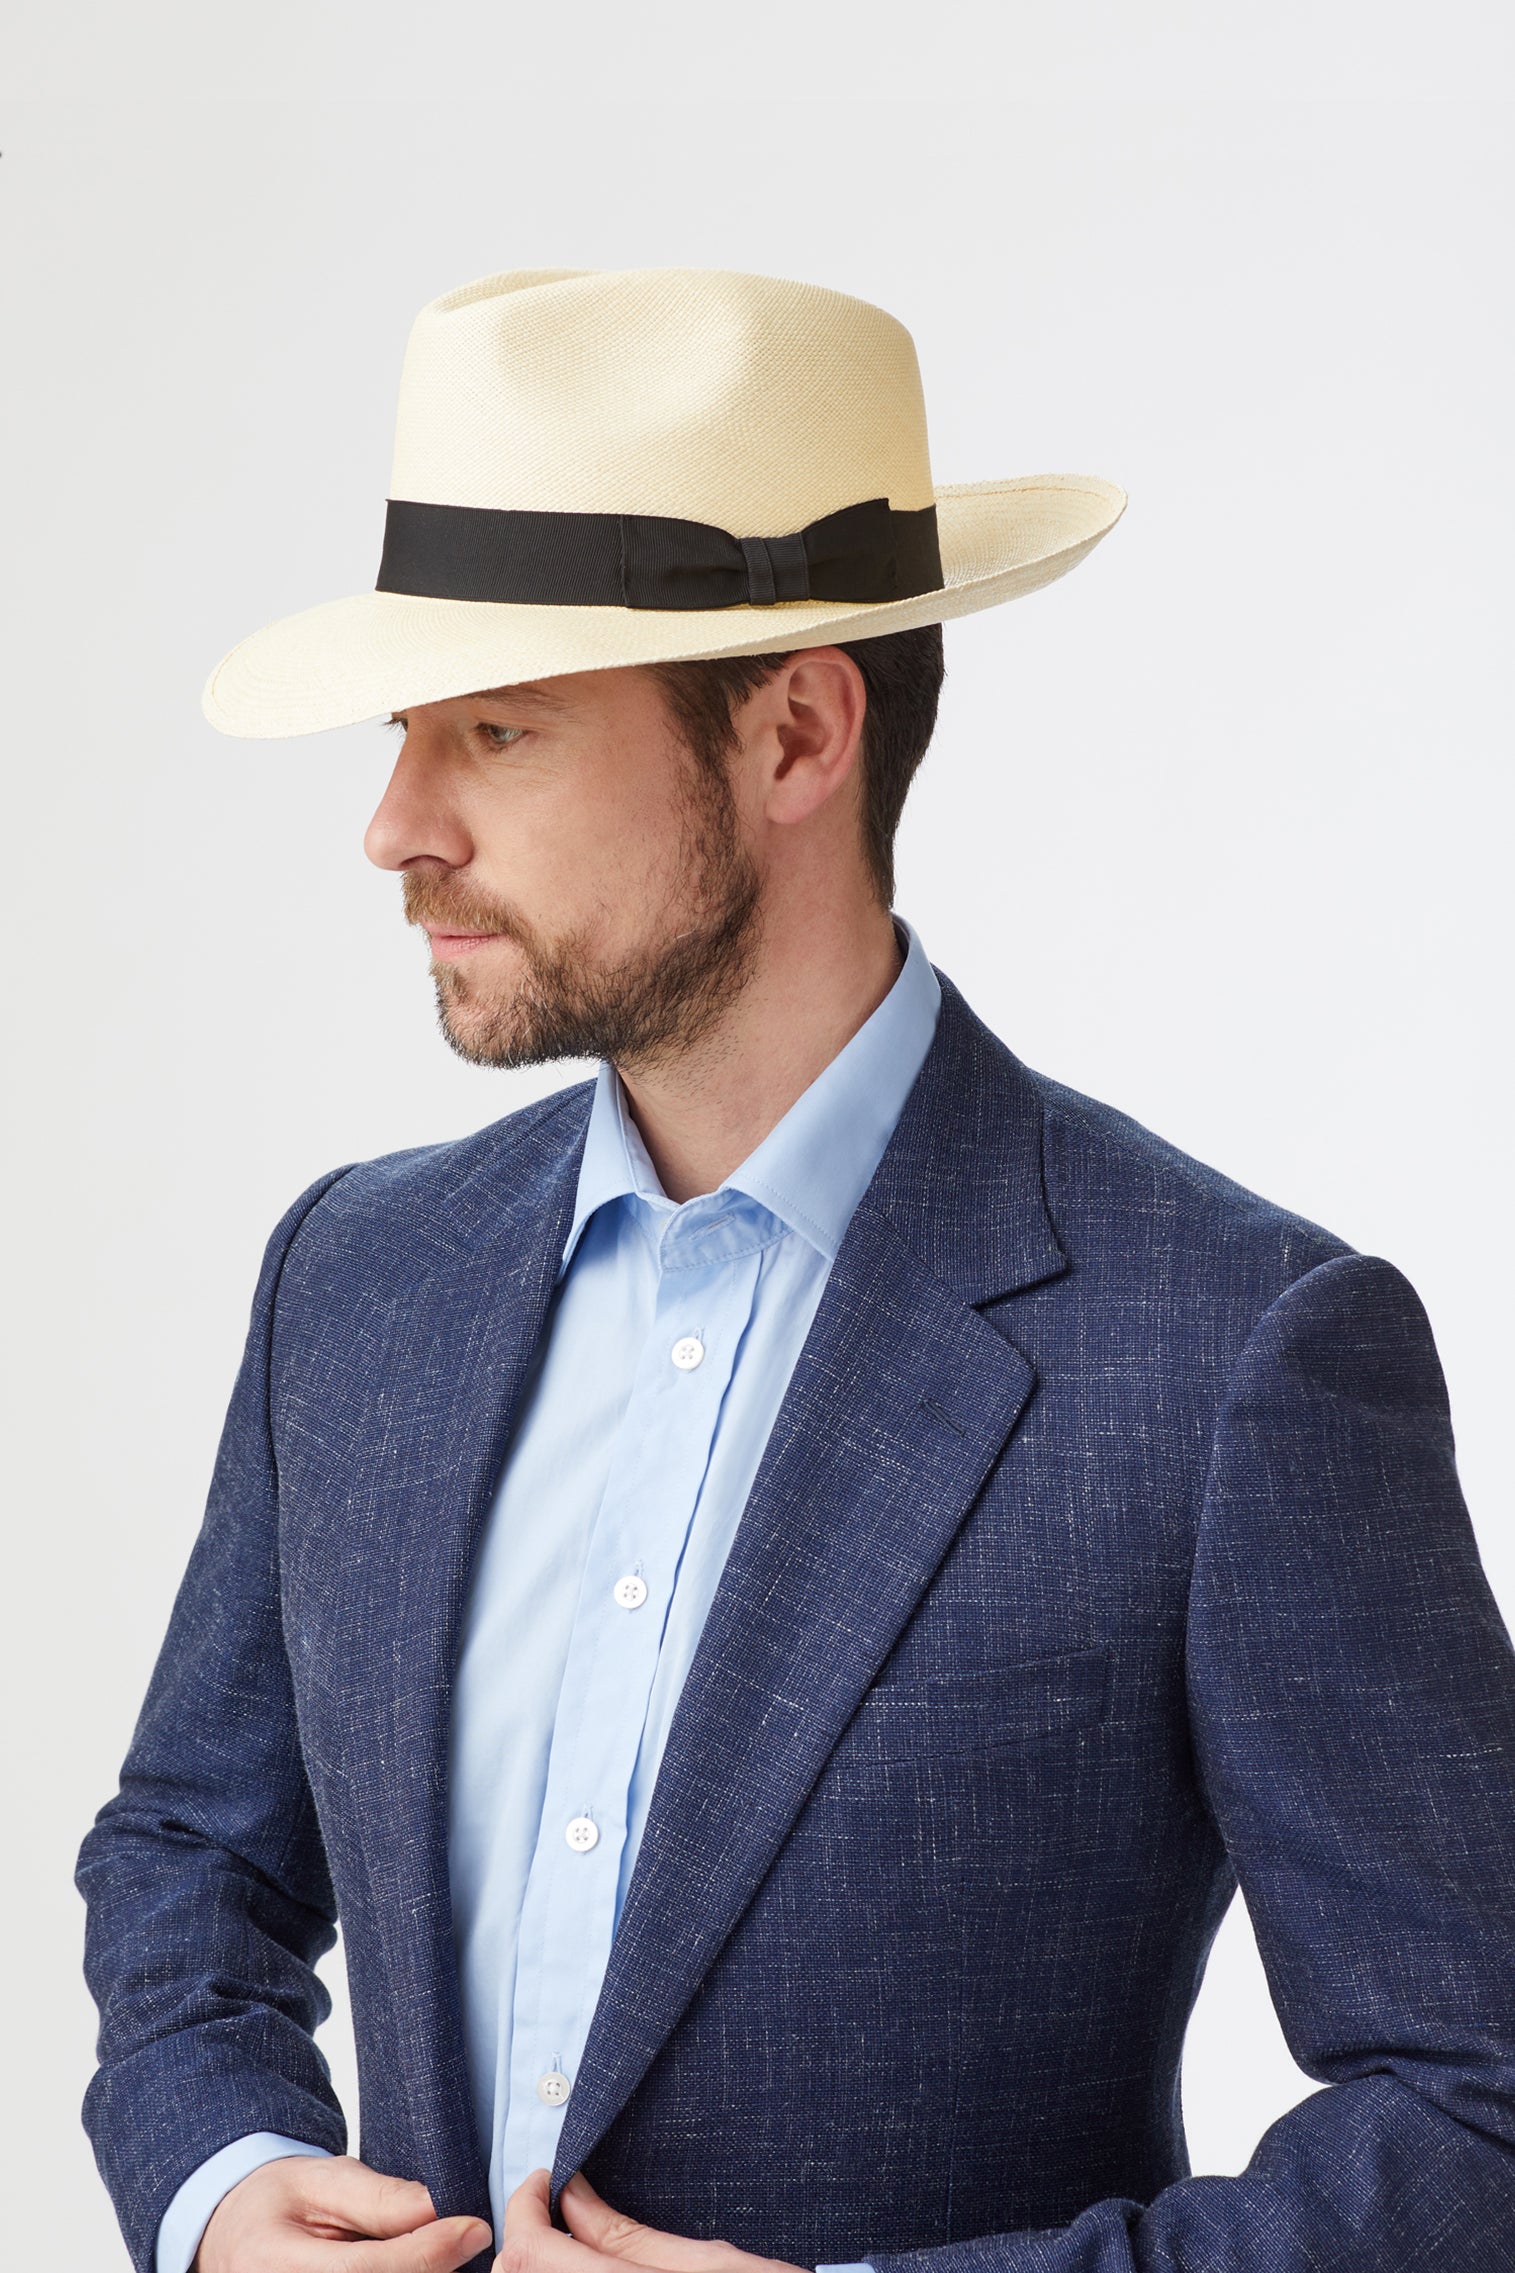 Wide Brim Panama - Hats for Square Face Shapes - Lock & Co. Hatters London UK